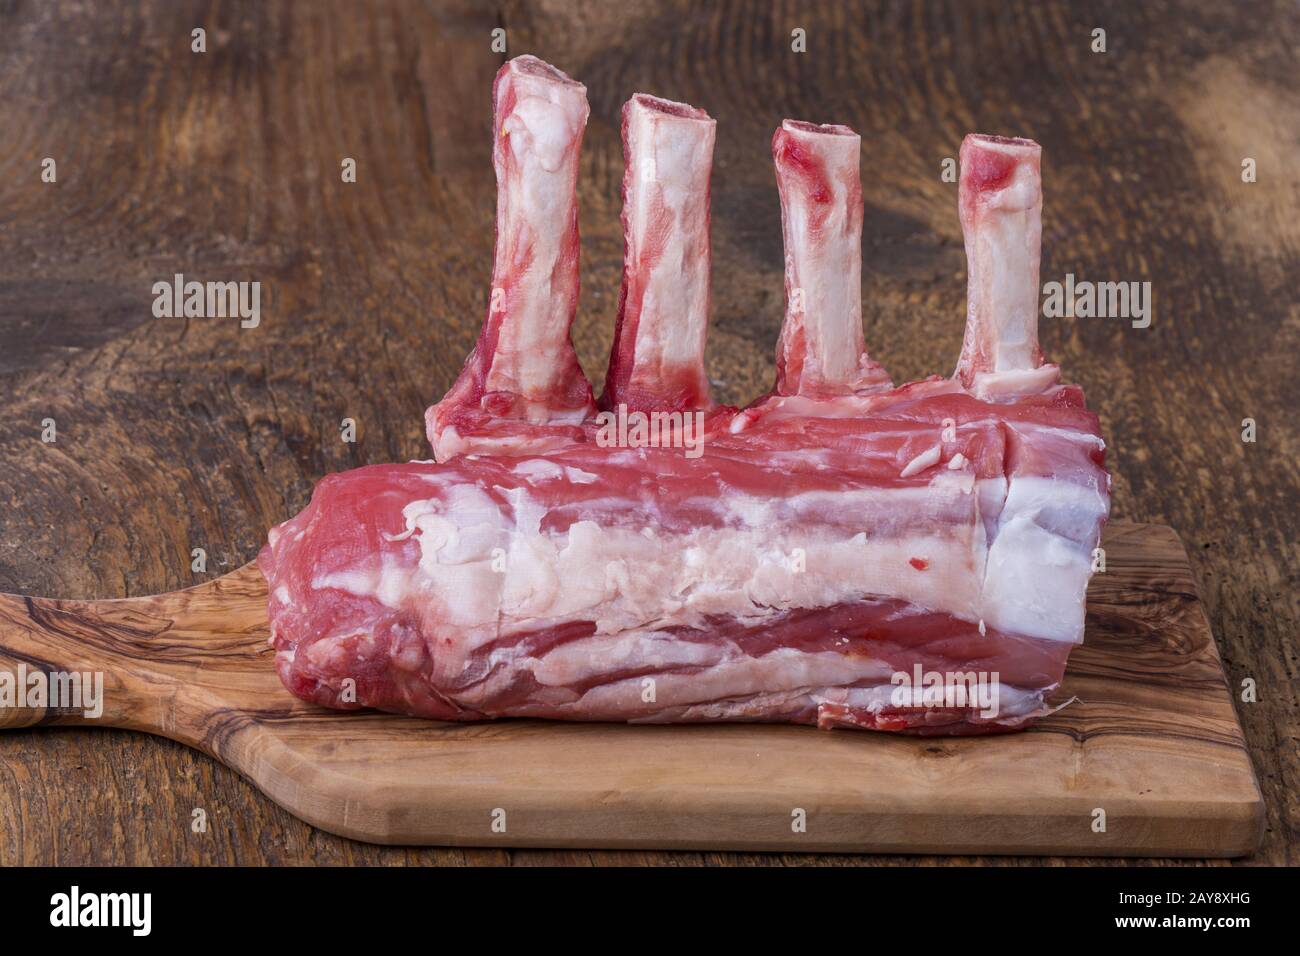 uncut raw veal loin on wood Stock Photo